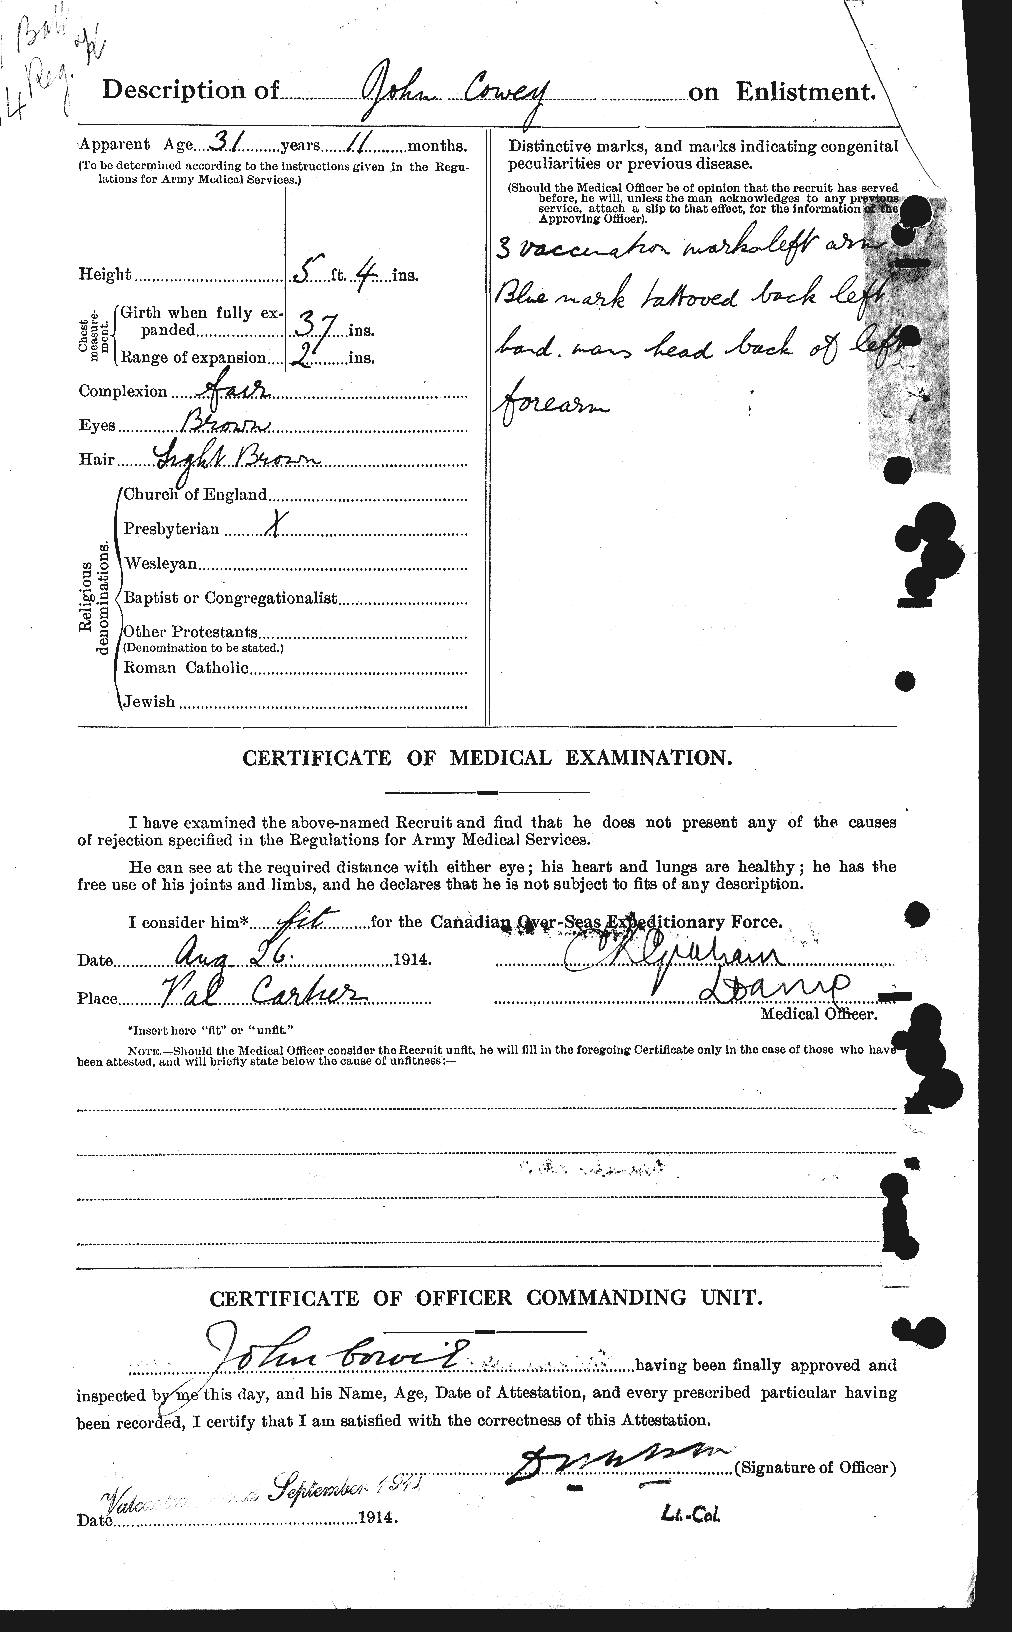 Personnel Records of the First World War - CEF 690958b